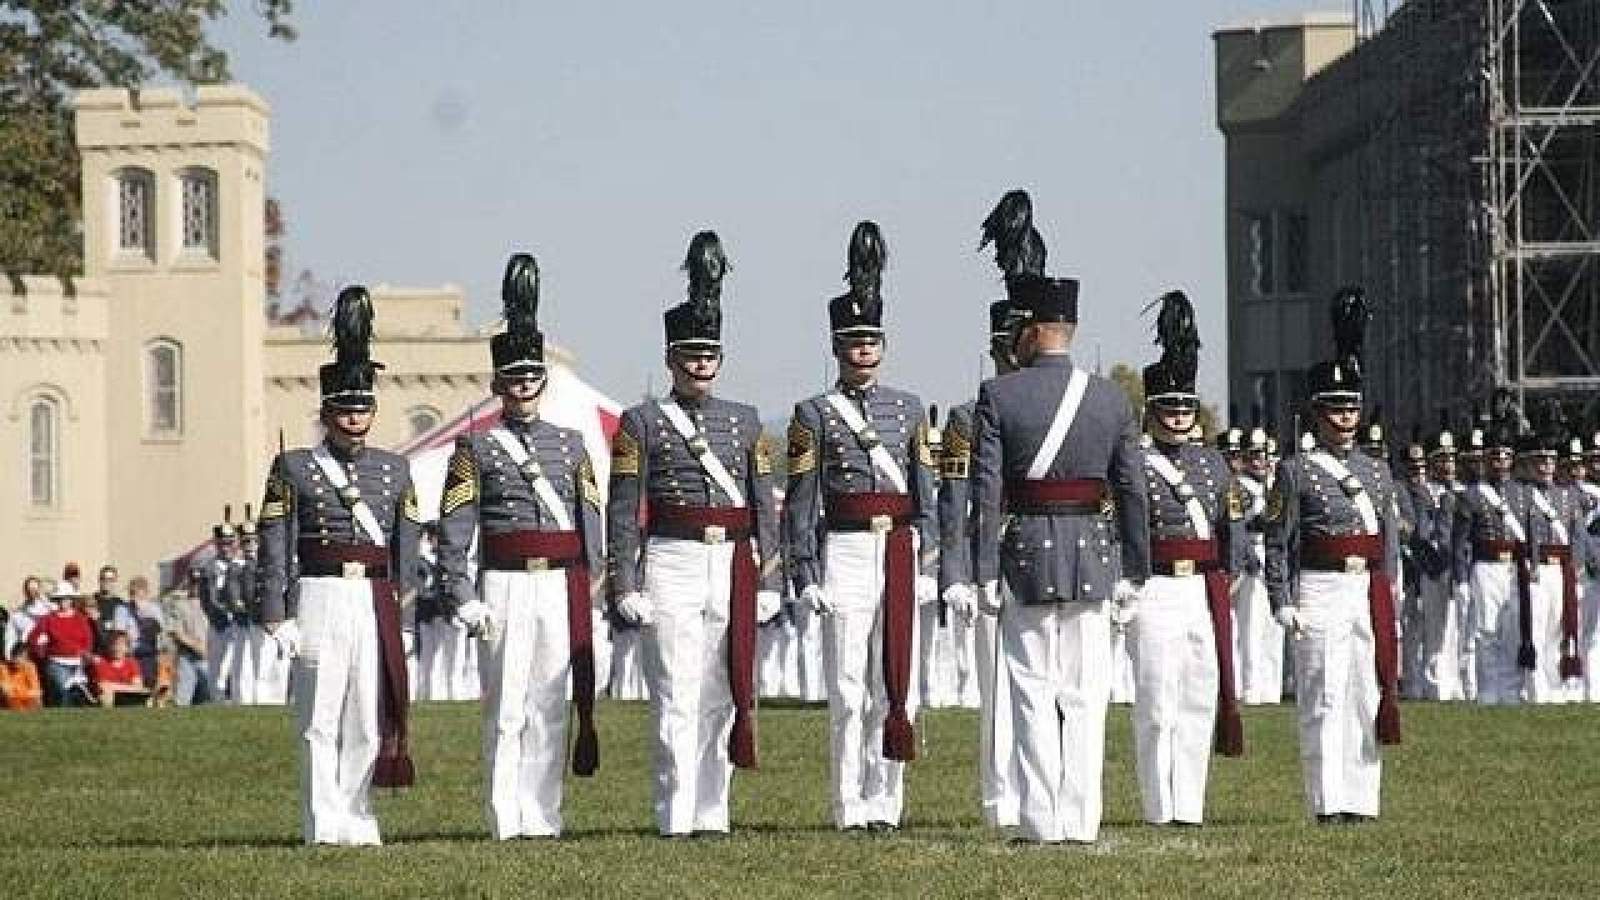 VMI could alter honor court over racial disparity concerns